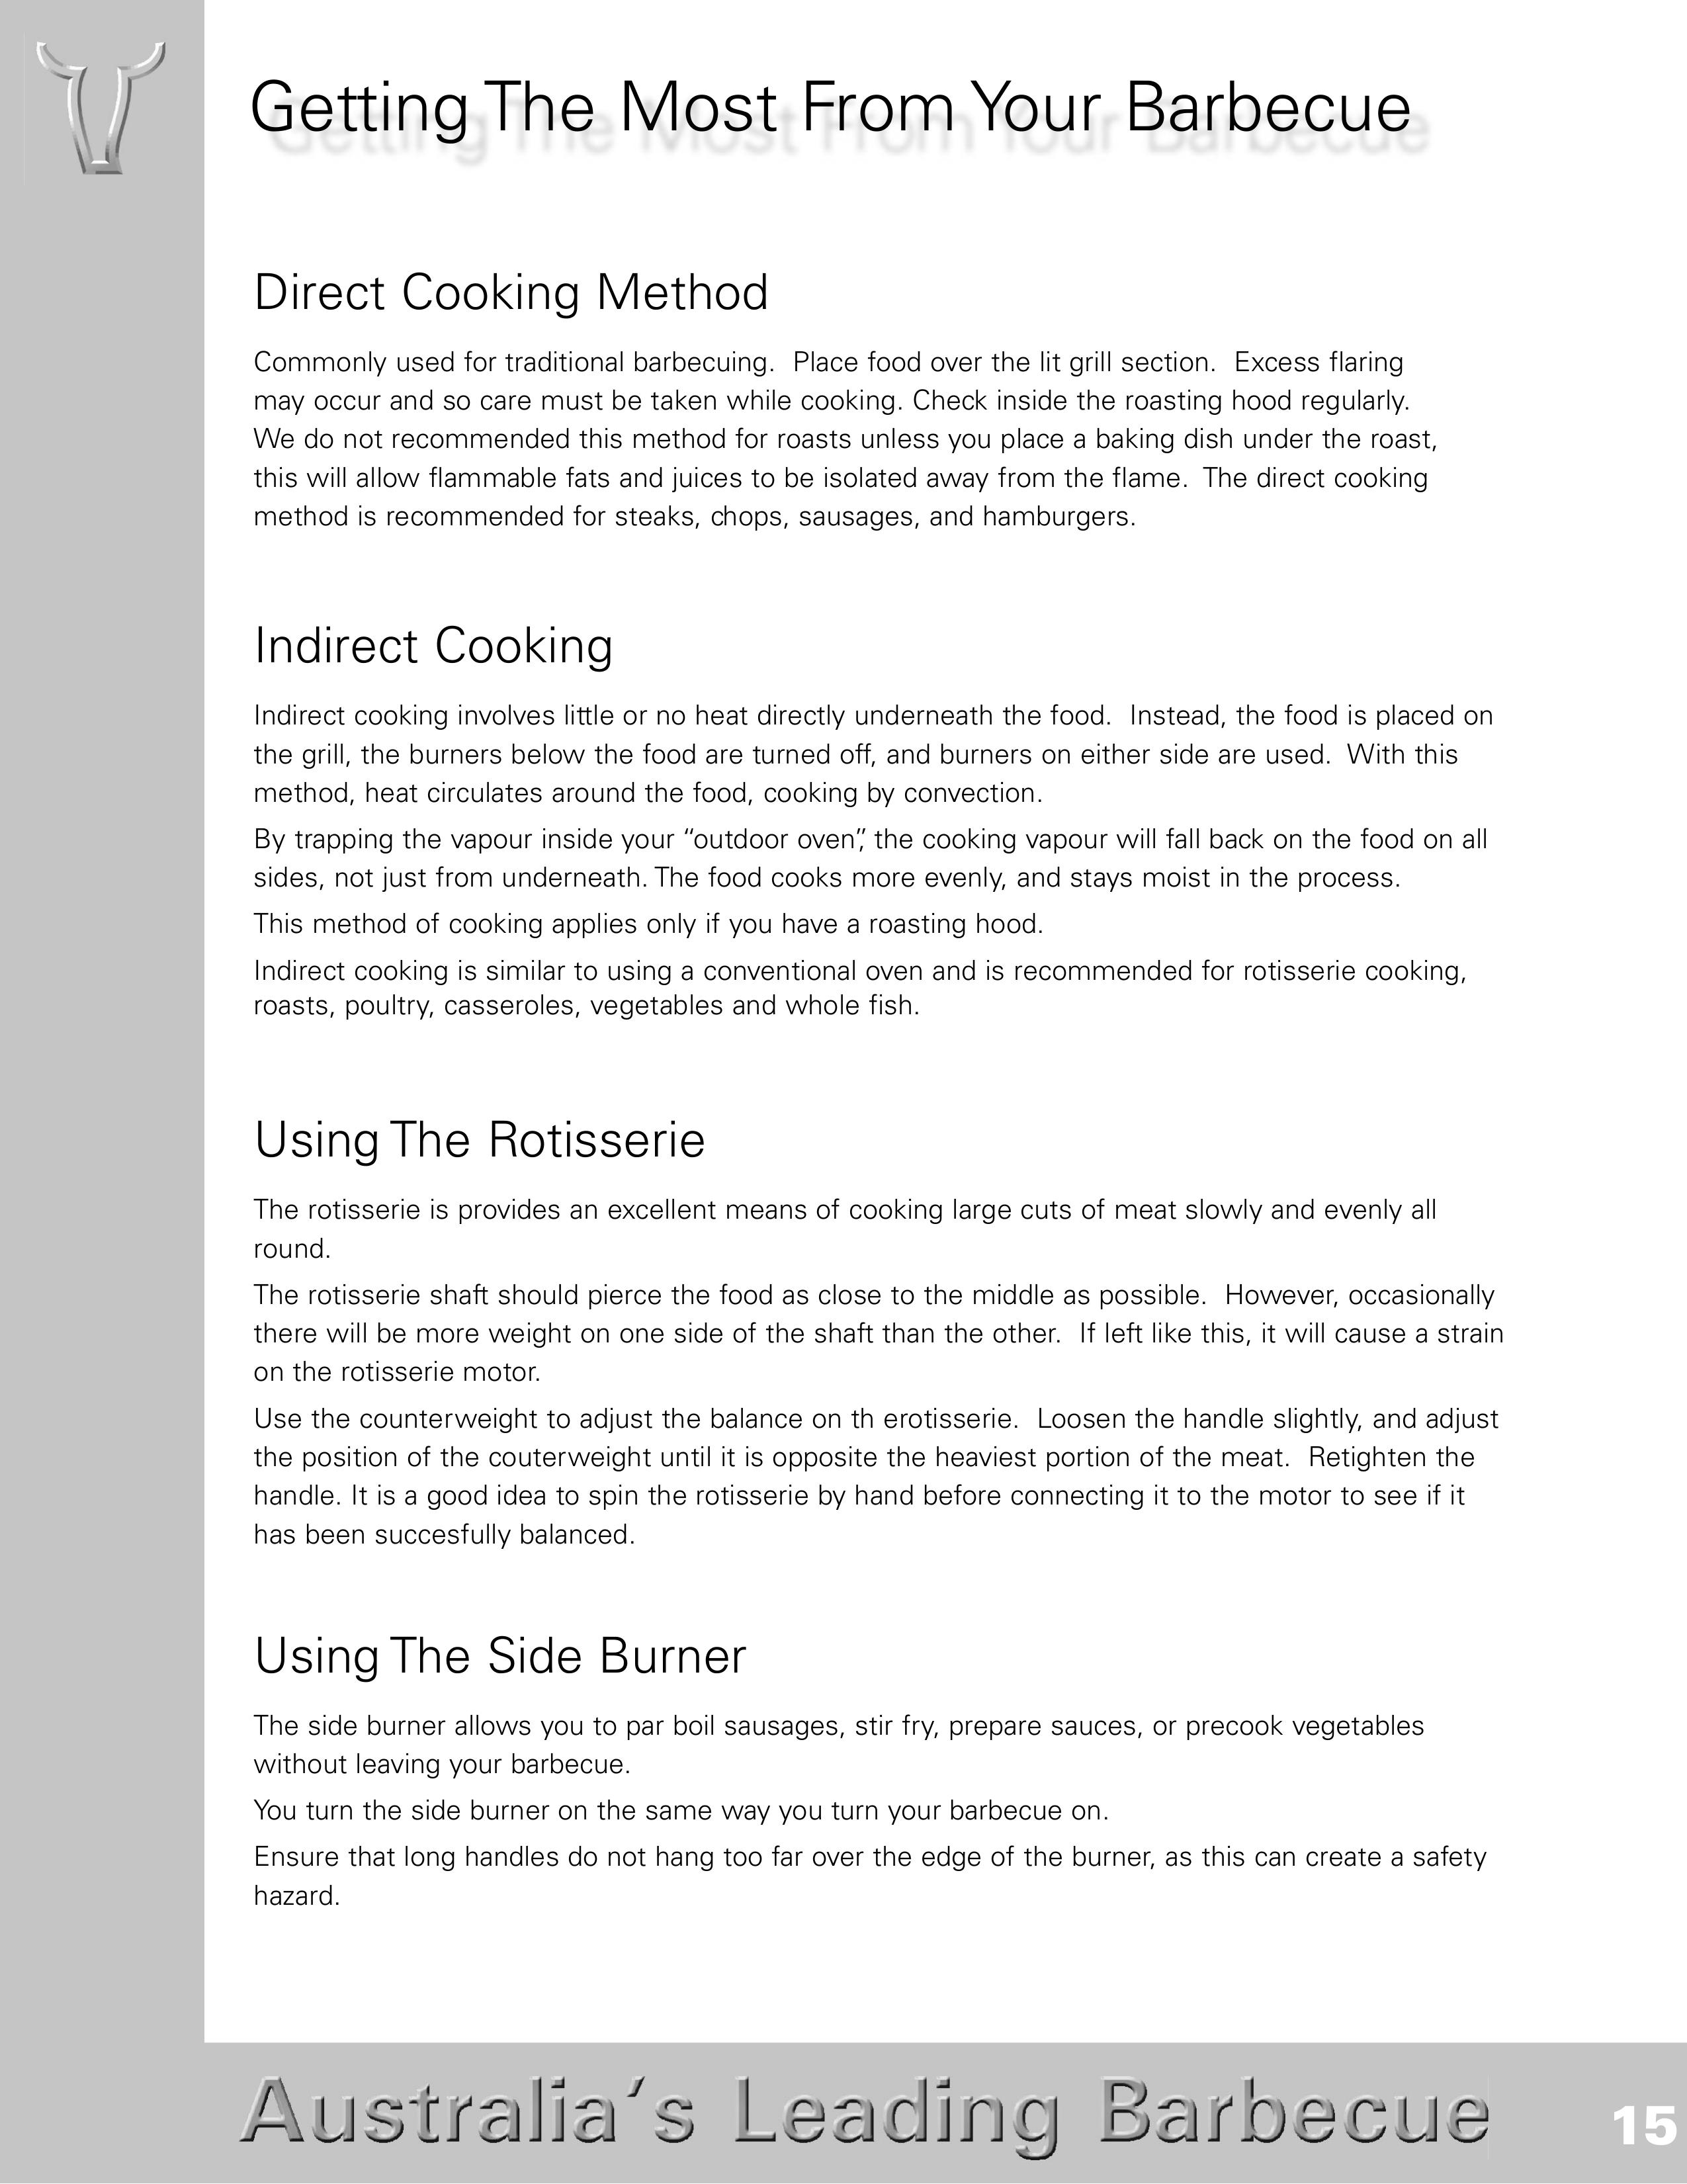 BeefEater SL4000s Charcoal Grill User Manual (Page 15)